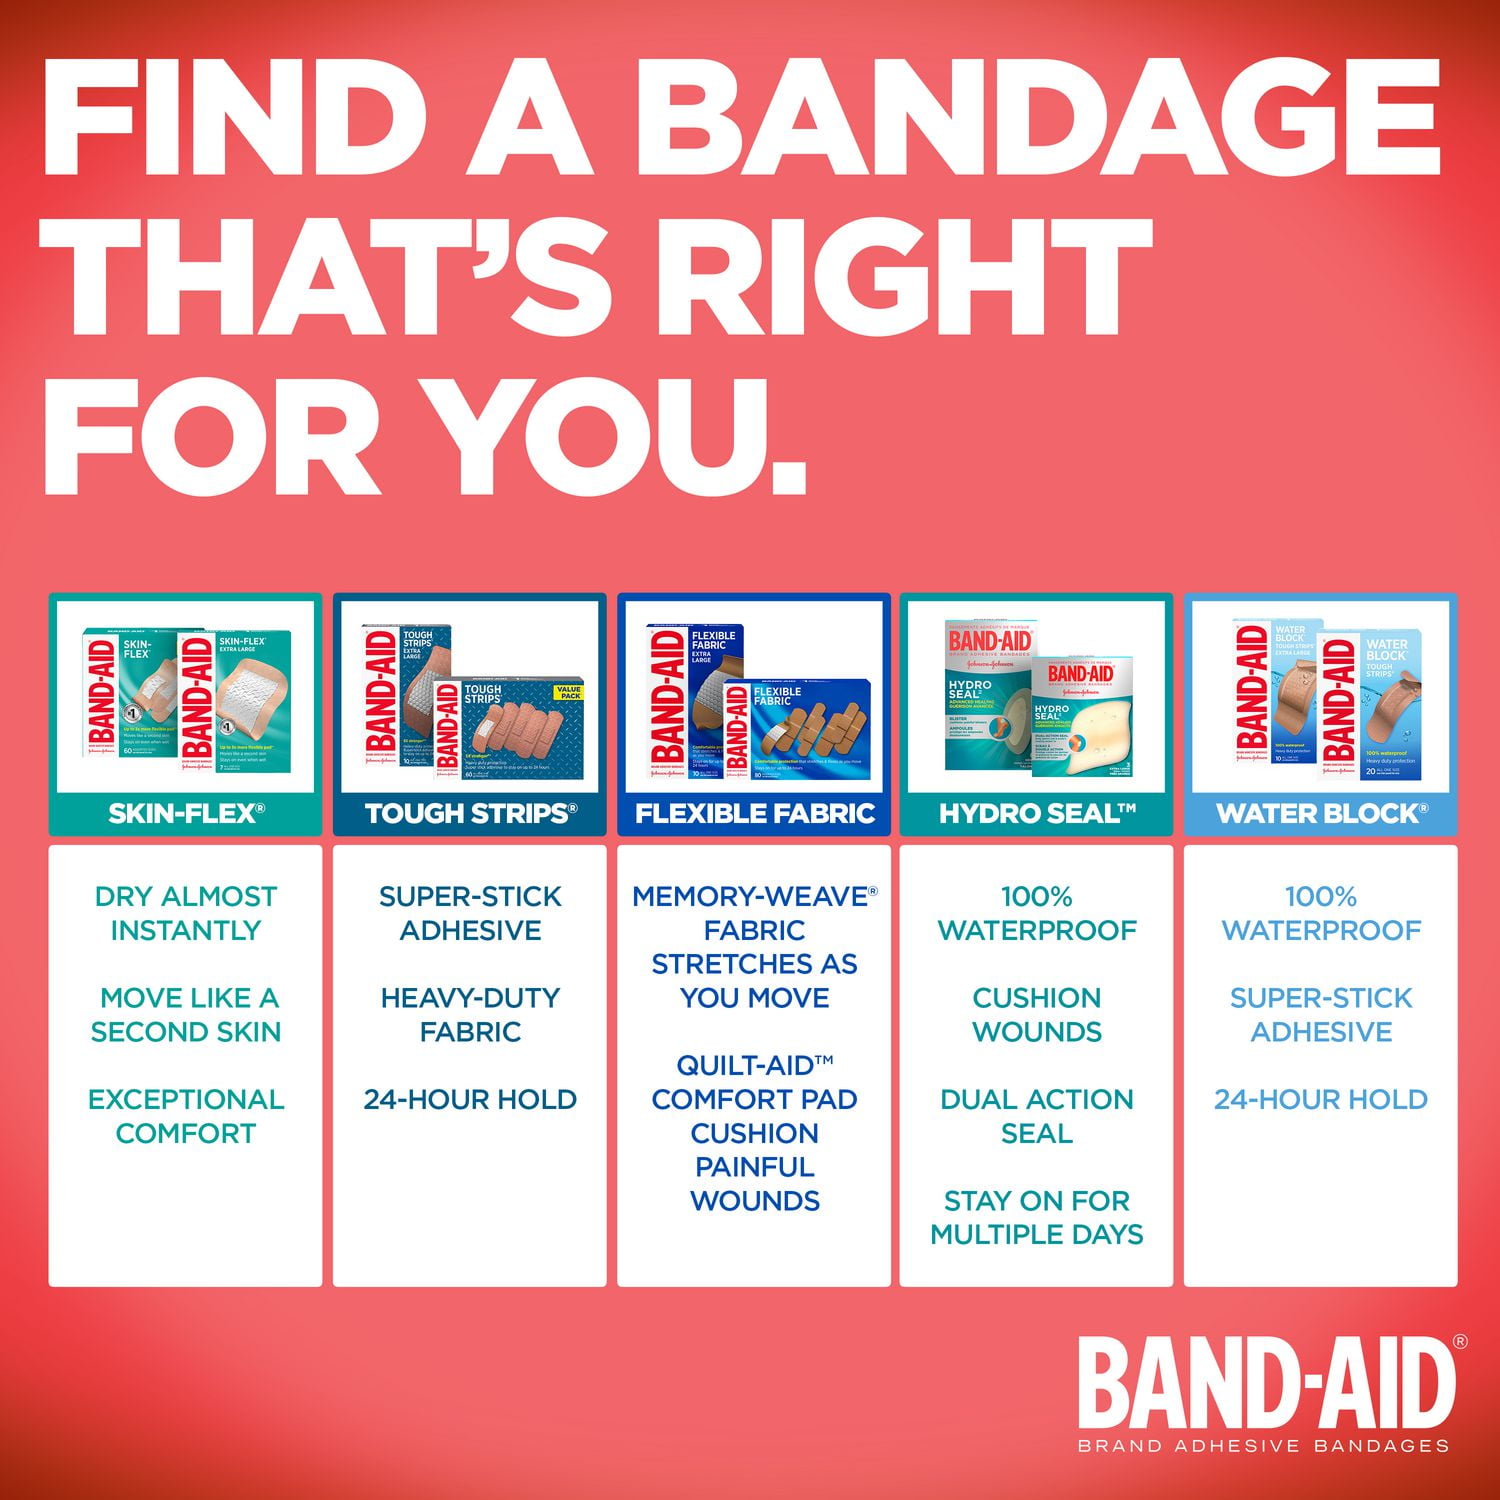 20 BAND-AID BRAND ADHESIVE BANDAGES TOUGH STRIPS BOX 5X STRONGER